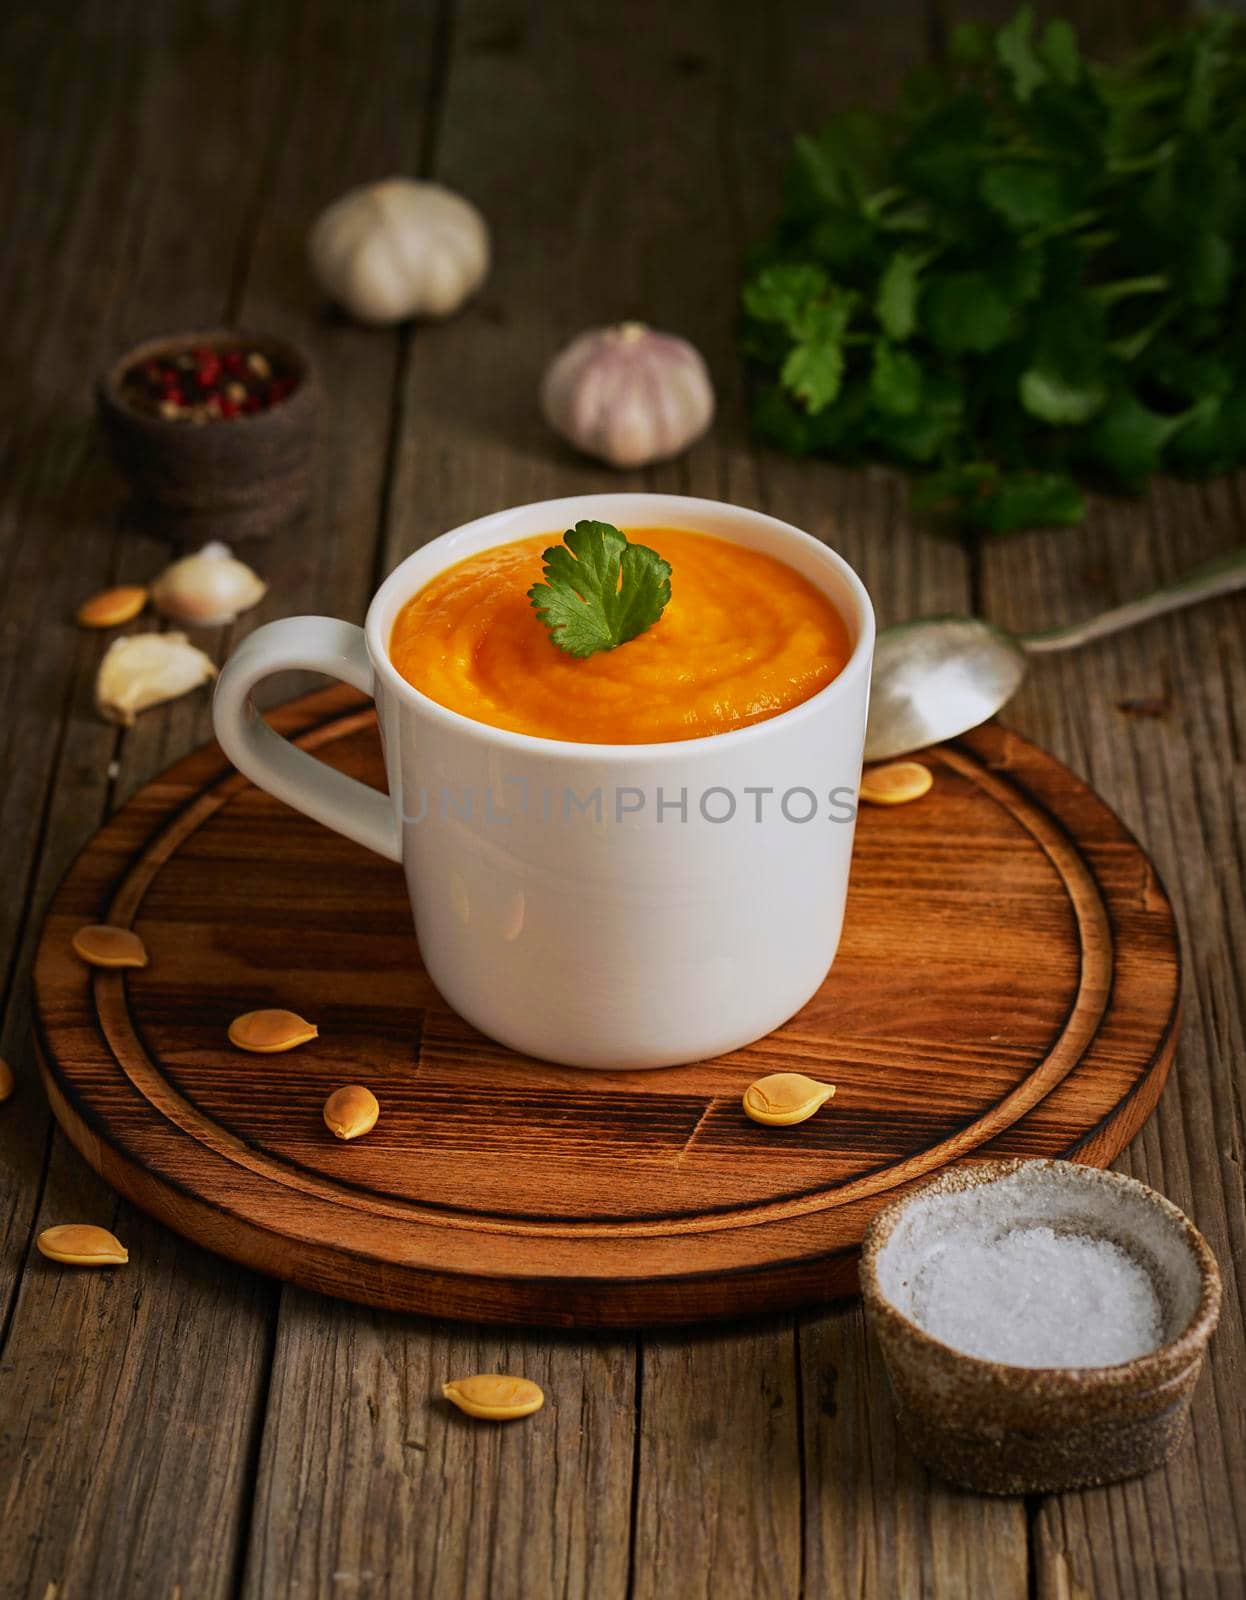 Pupmkin cream soup in cup on brown wooden table, vertical, side view. Dietary vegetarian puree on cutting board with parsley, garlic.